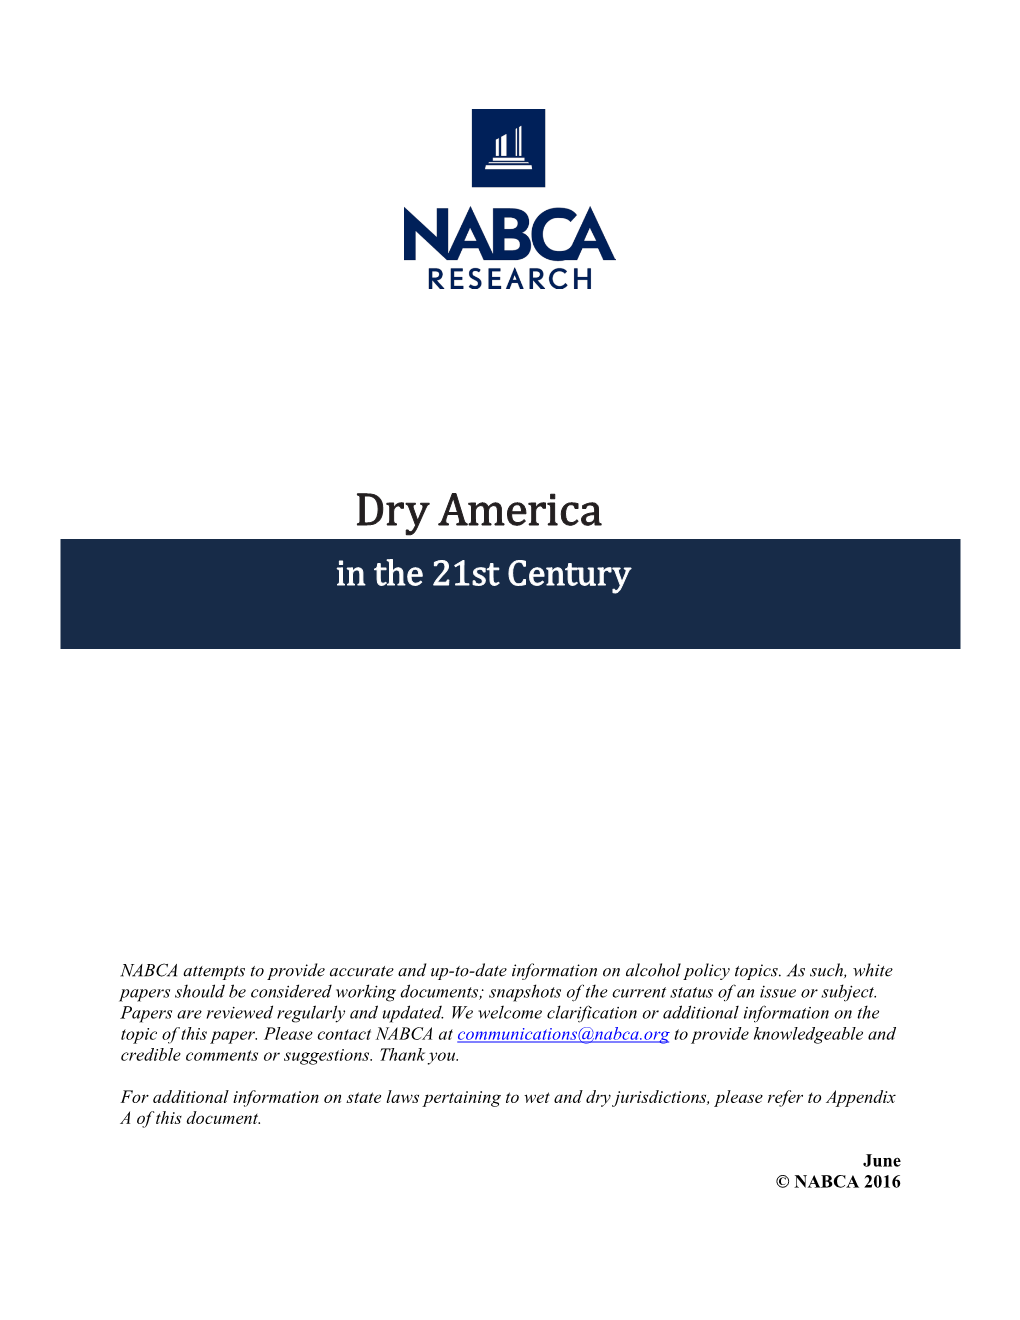 Dry America in the 21St Century